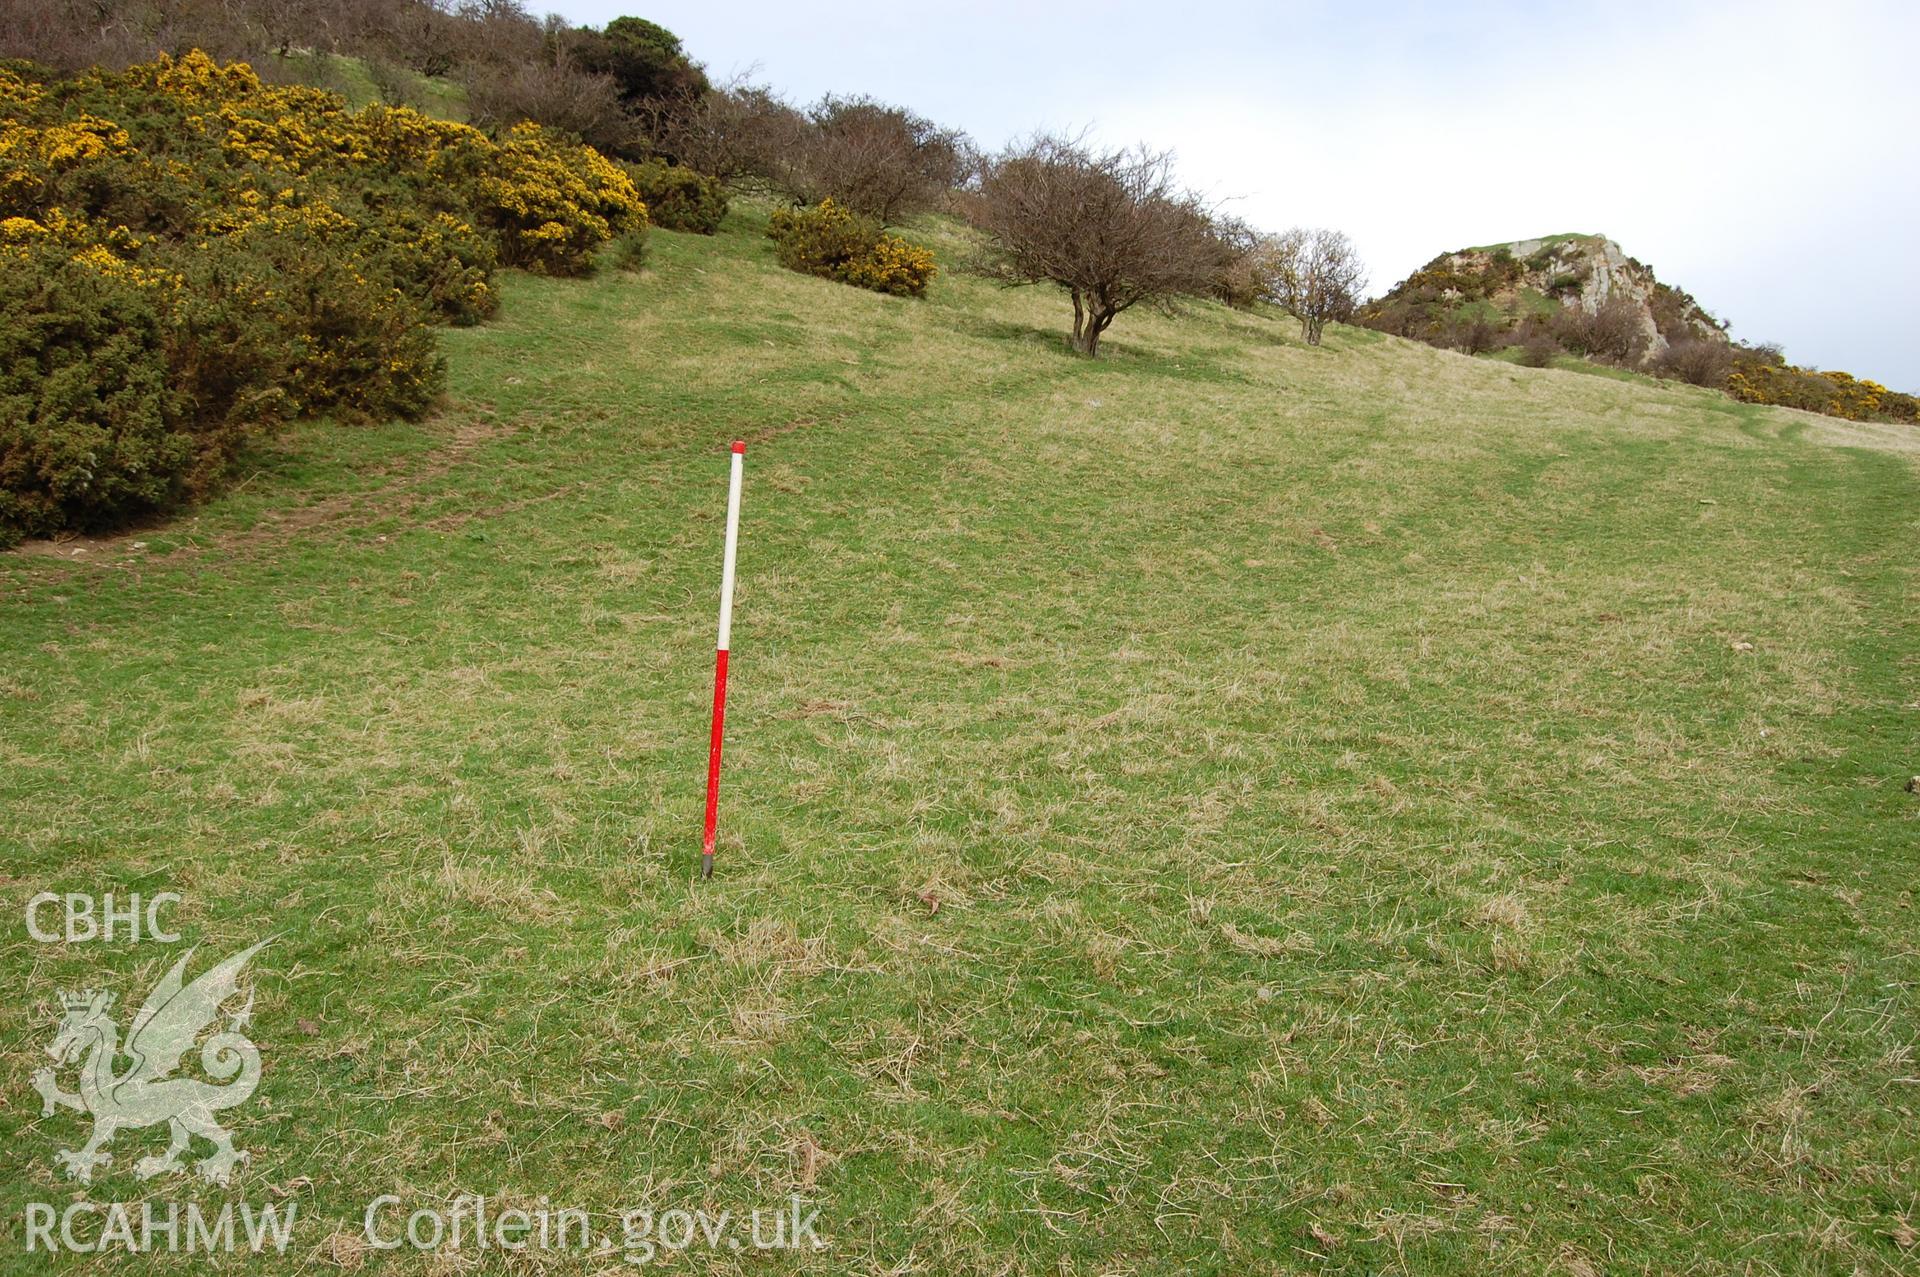 Digital photograph from an archaeological assessment of Deganwy Castle, carried out by Gwynedd Archaeological Trust, 2009. House platform in South settlement.